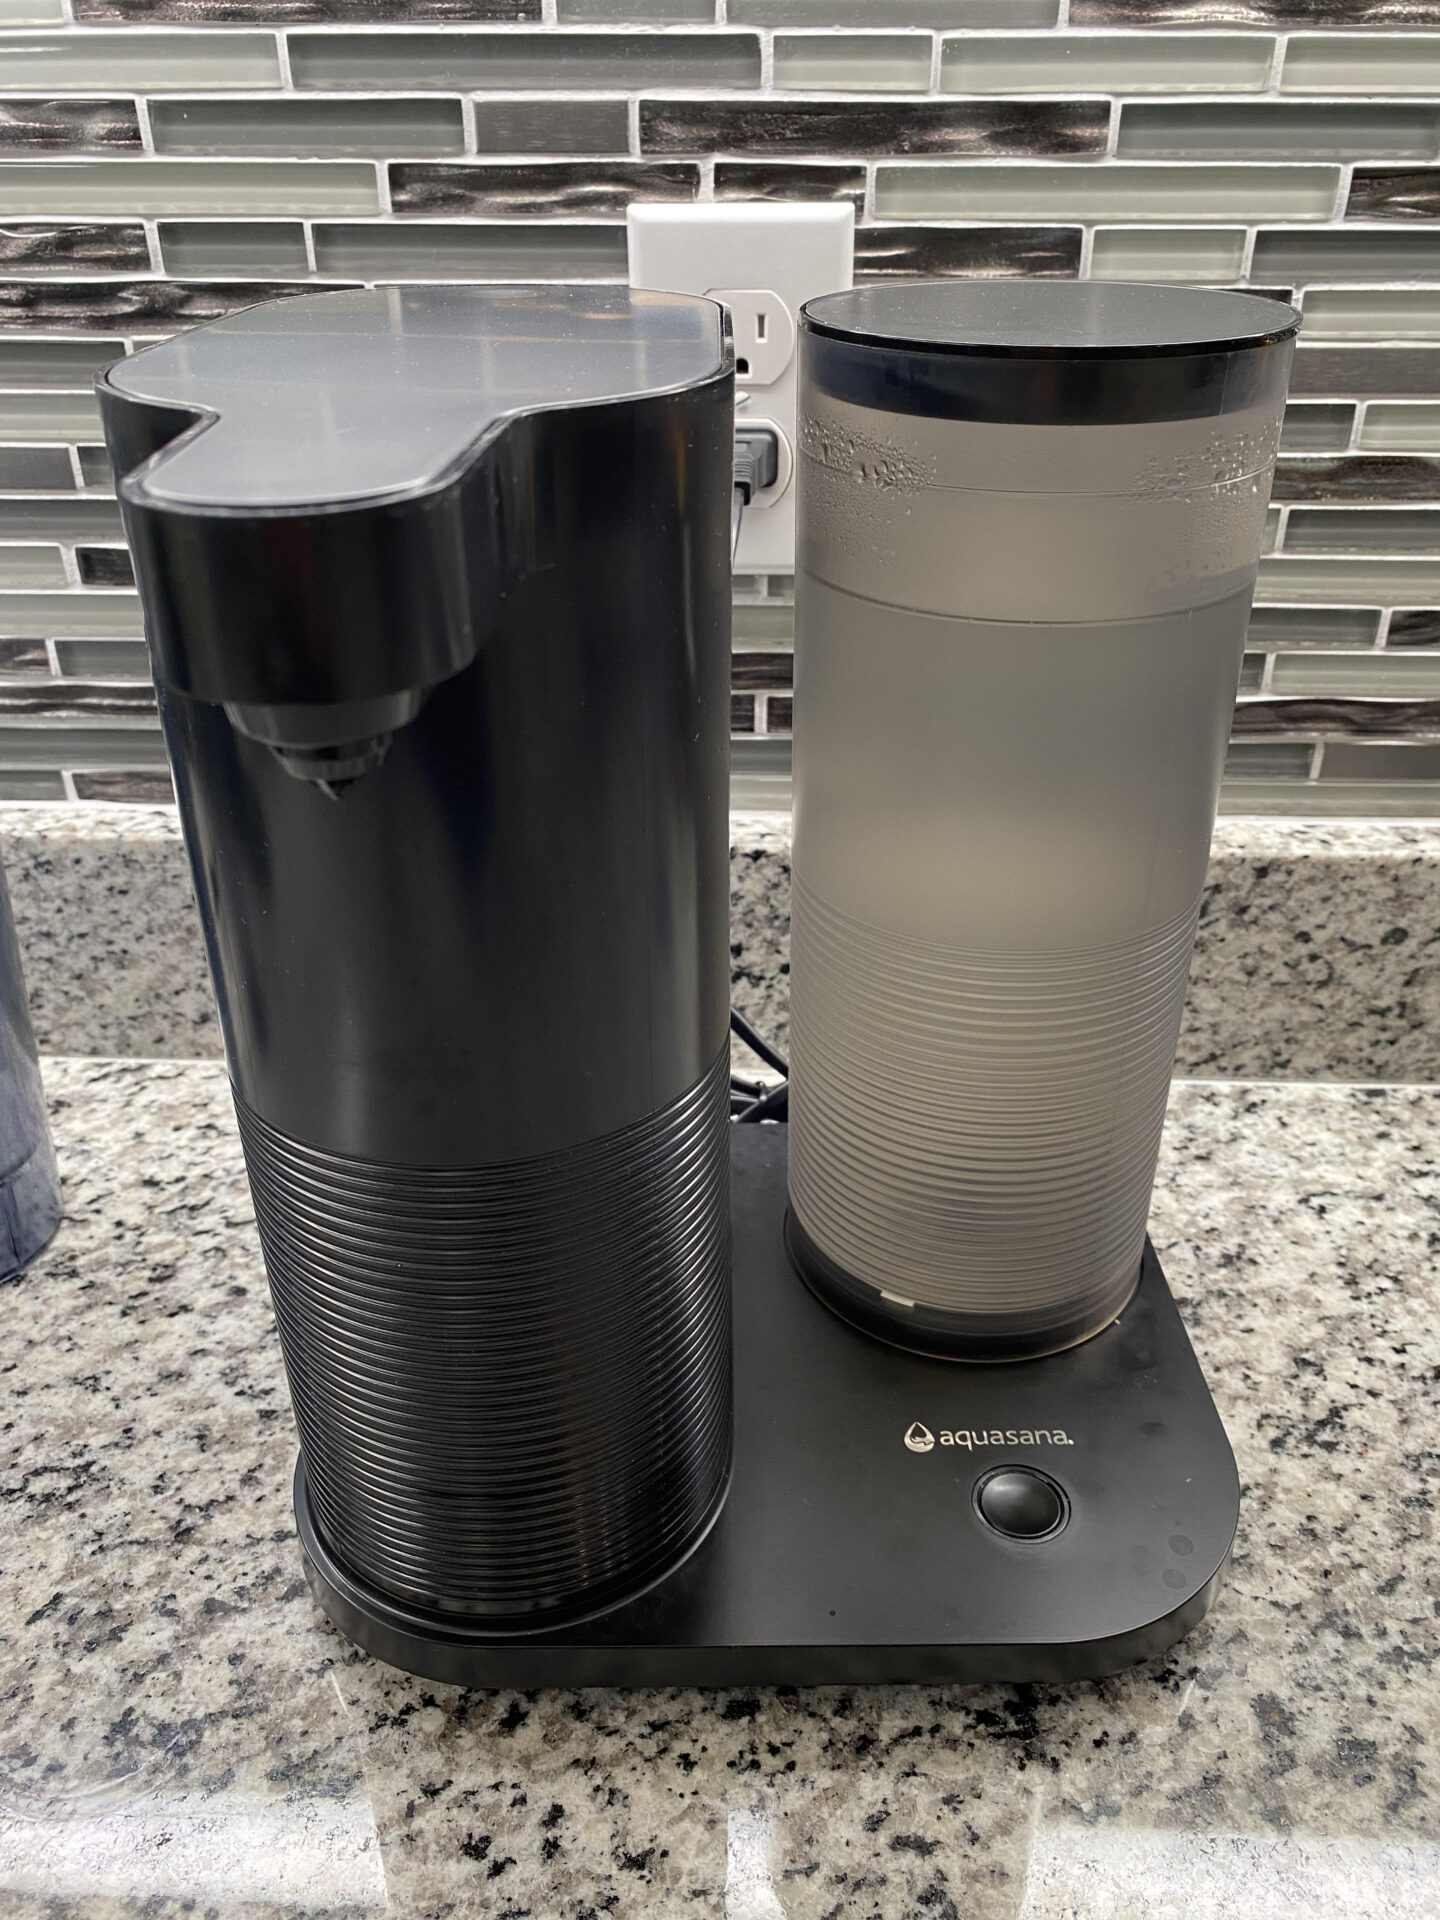 Aquasana Countertop Water Filter System for Drinking Water (Expert Review)